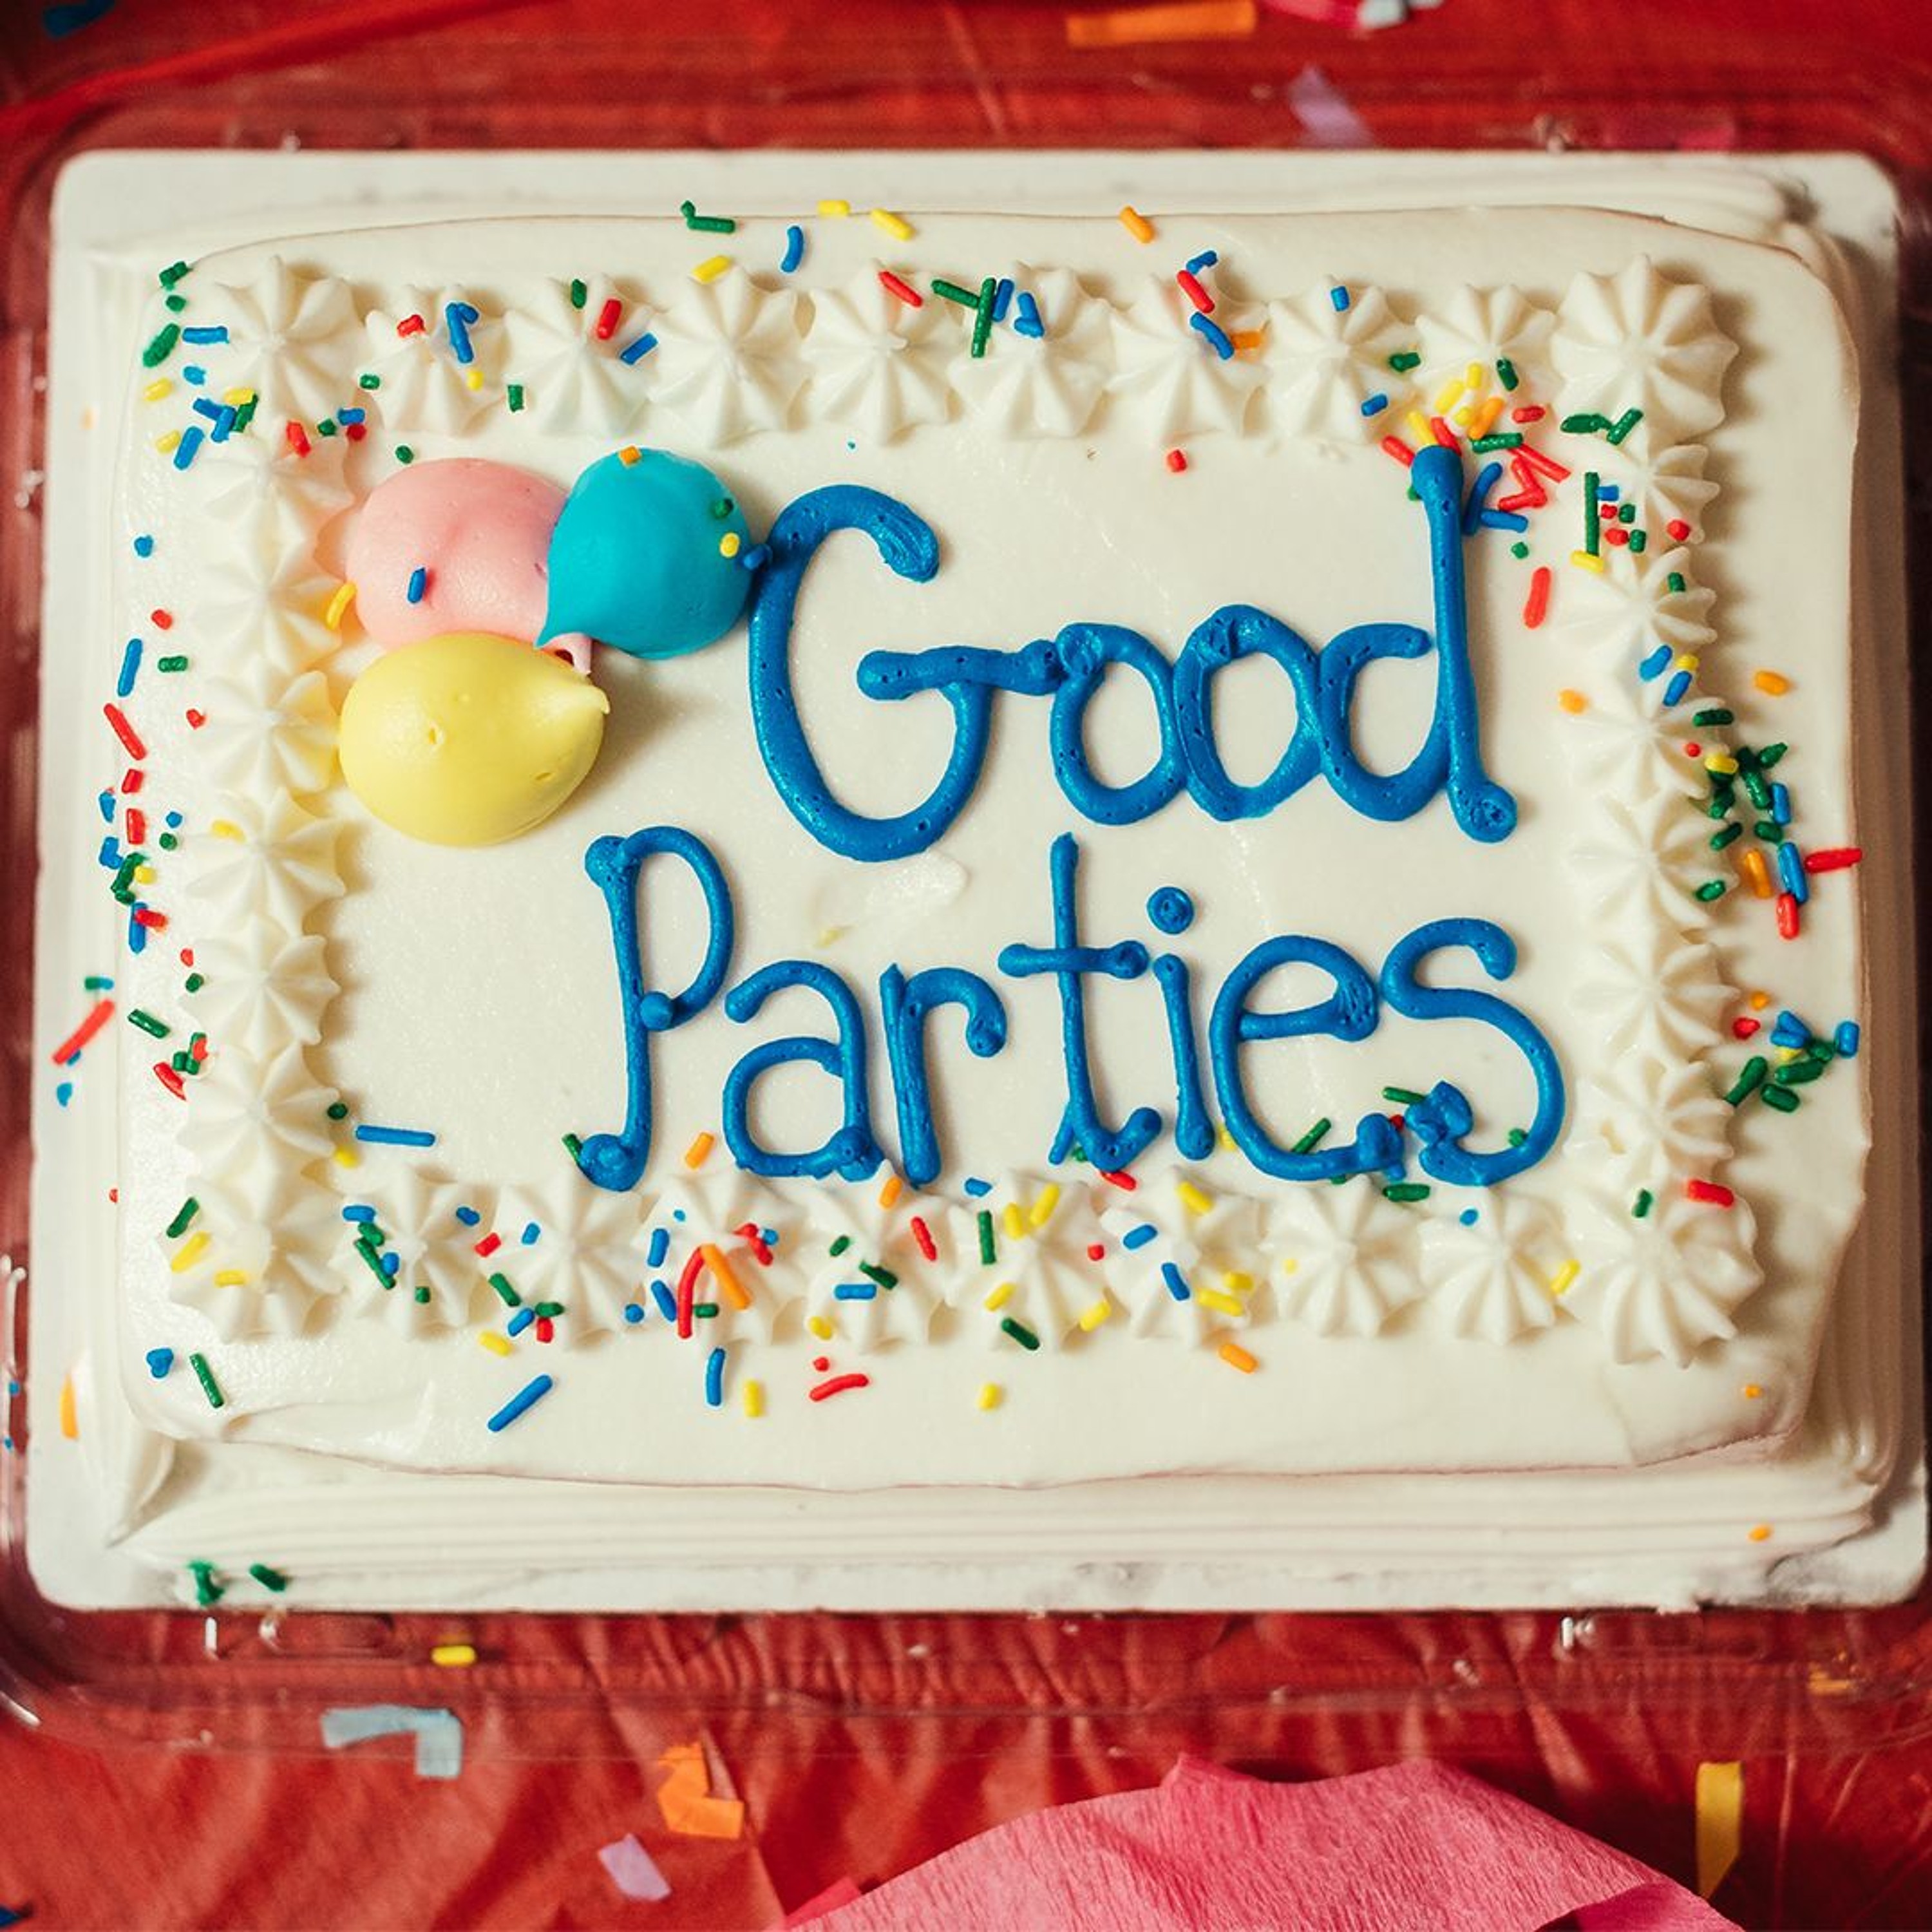 Good Parties Are Good News | Good Parties | Ethan Magness